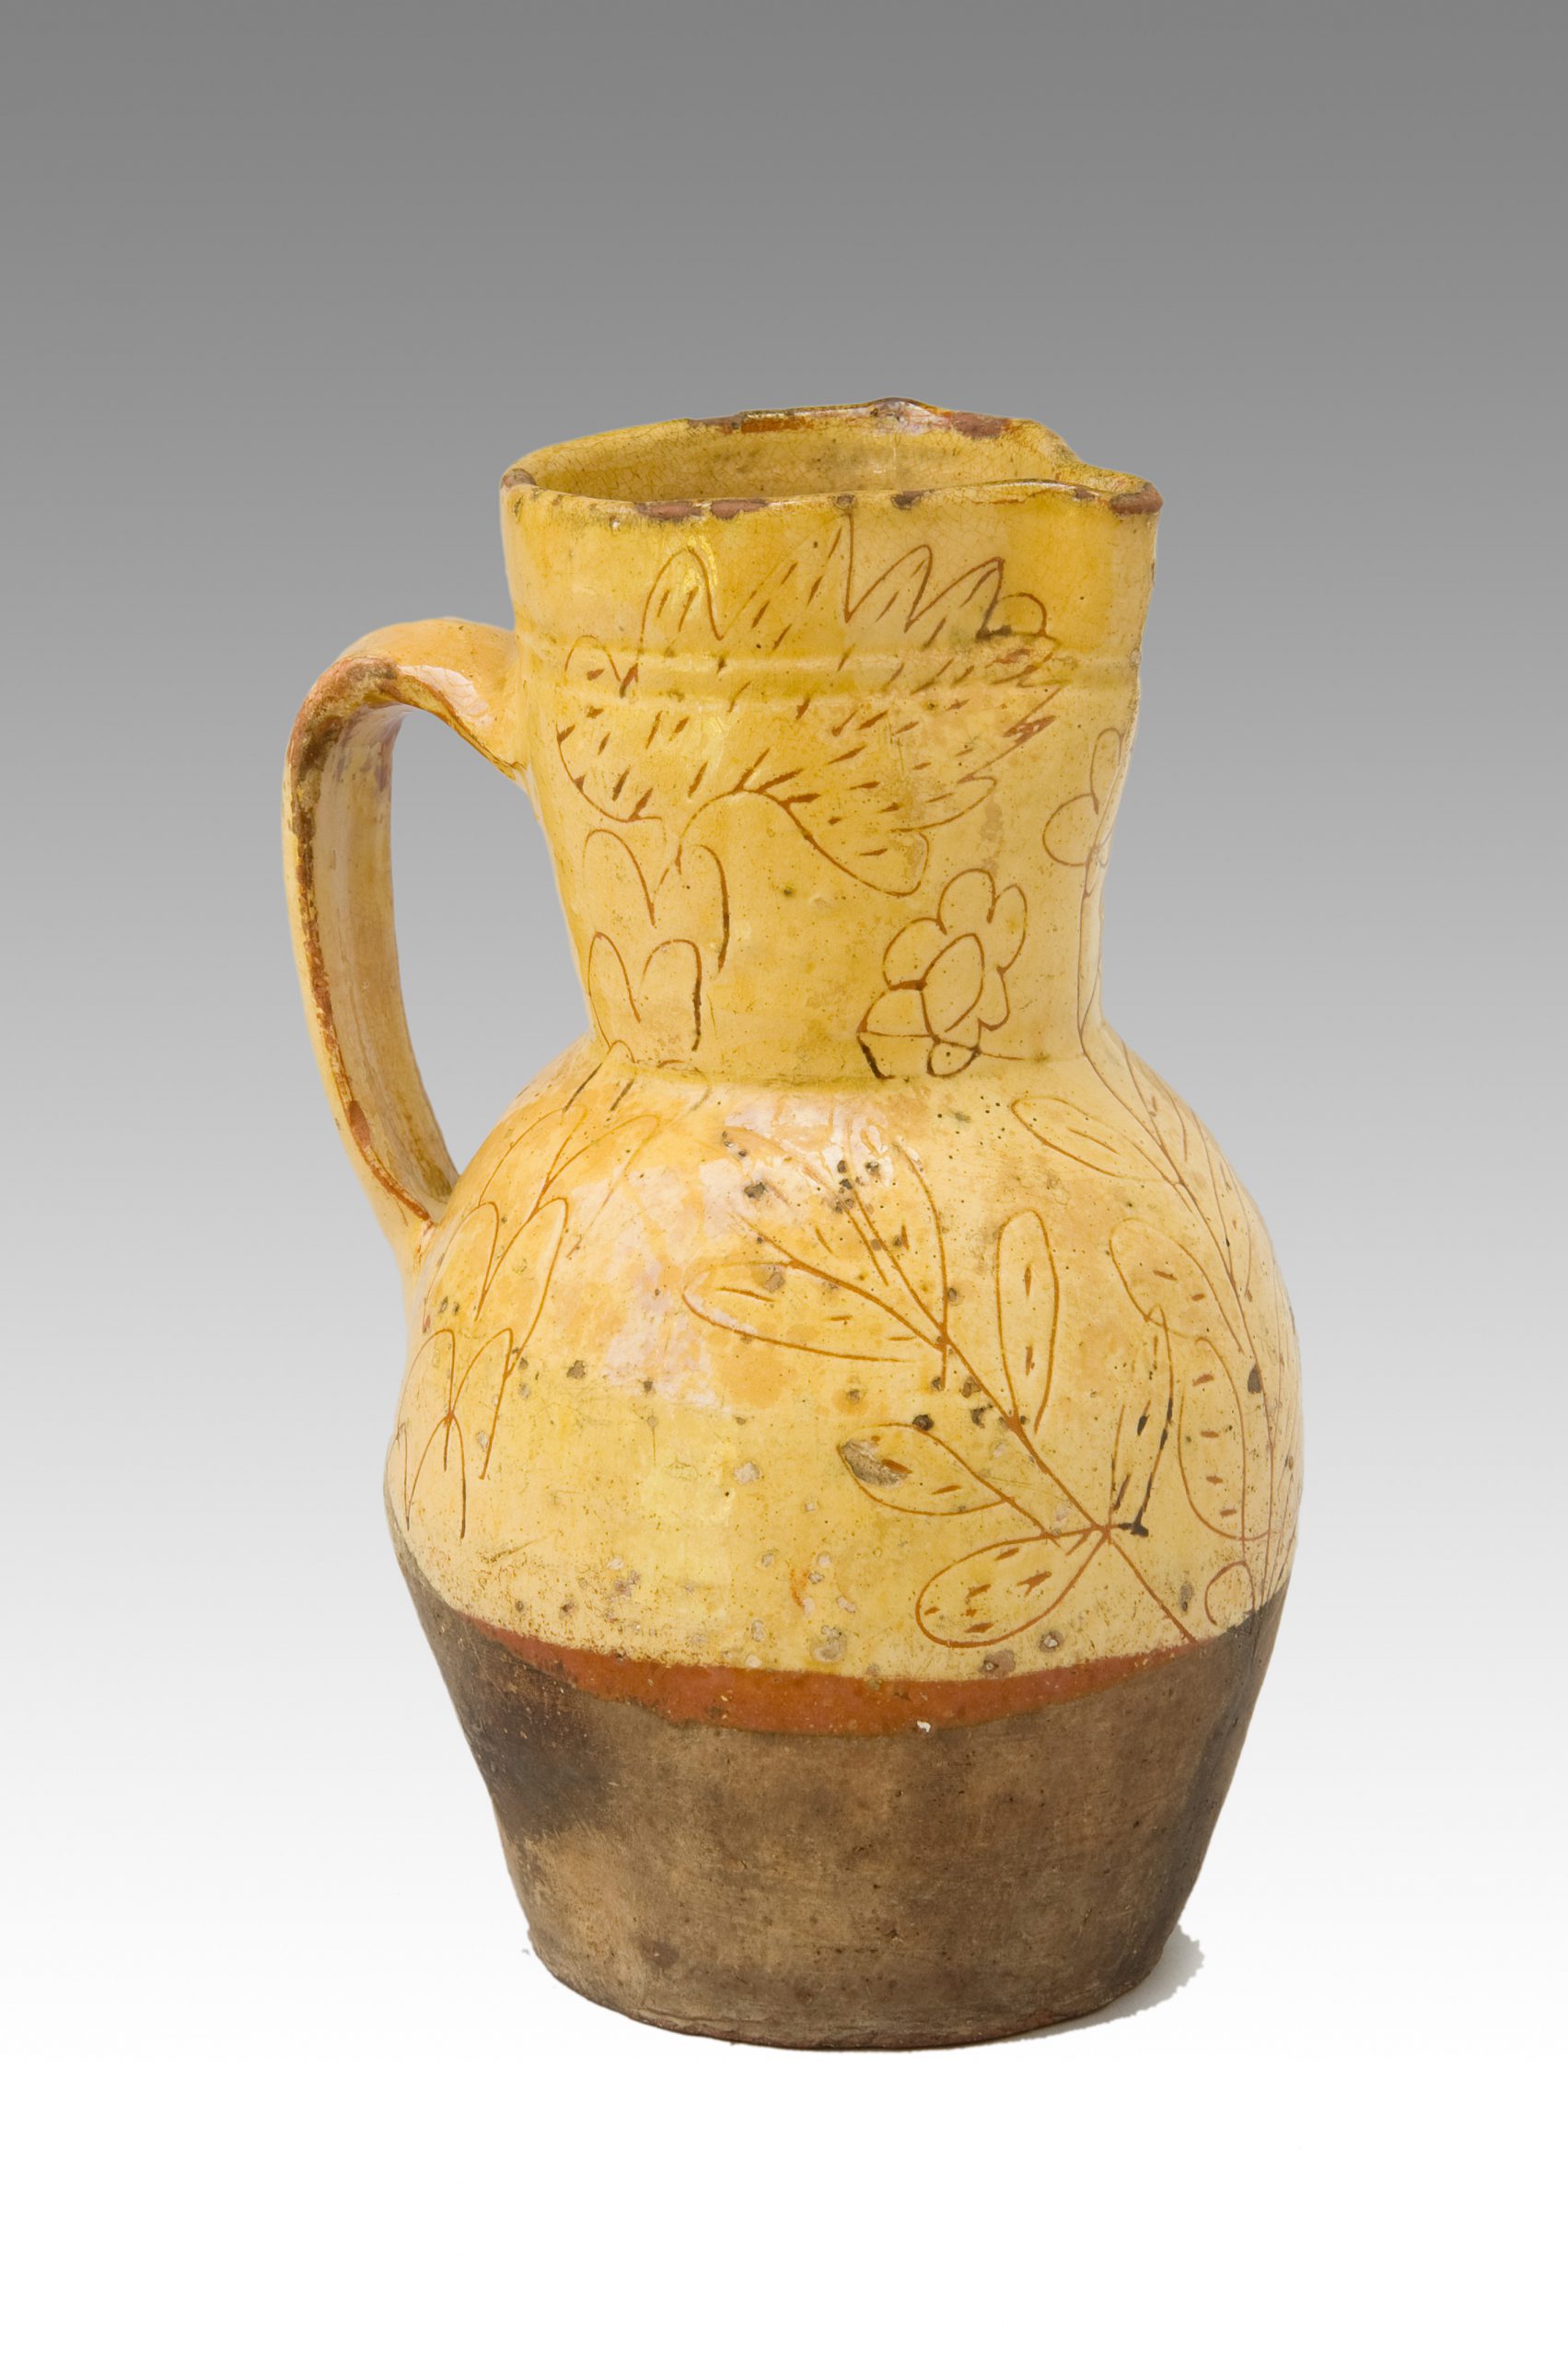 Image of A Slip-ware Pitcher.